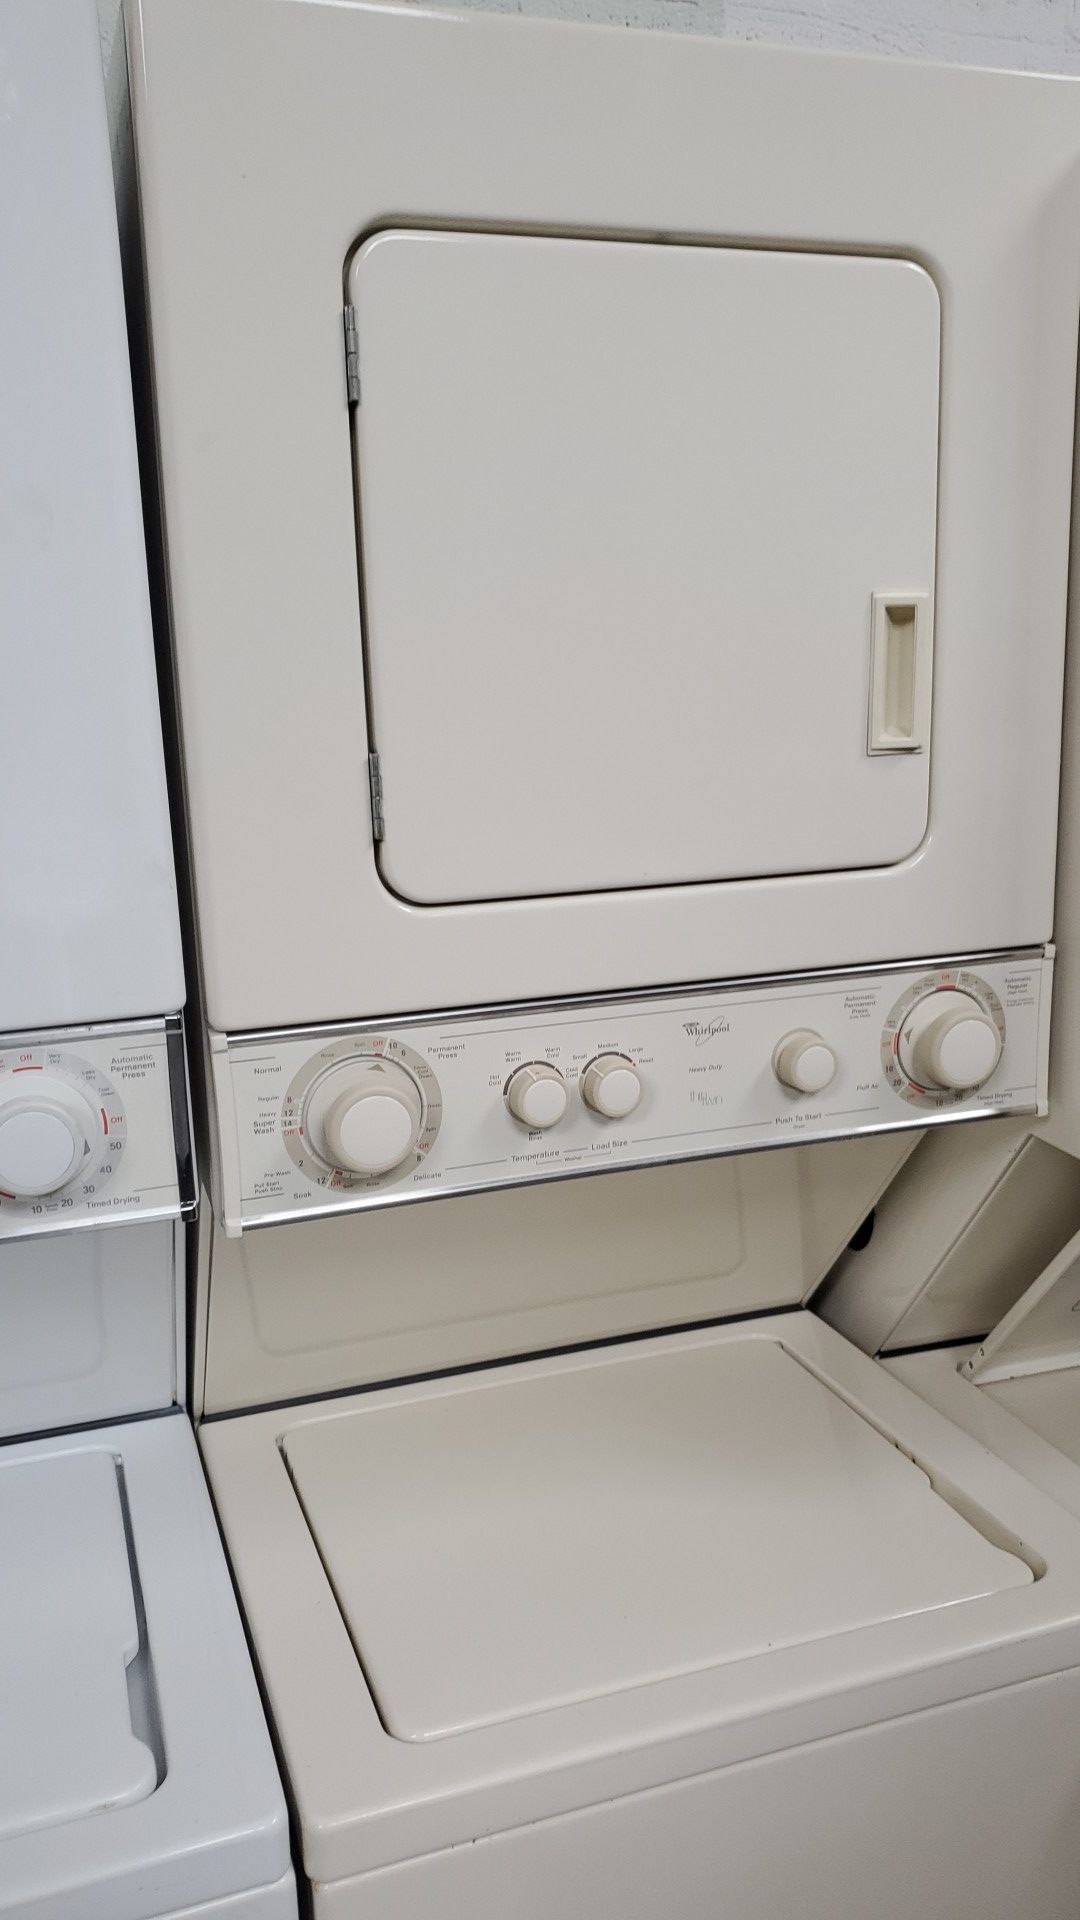 Washer and dryer whirlpool Combo 24inches (beige)